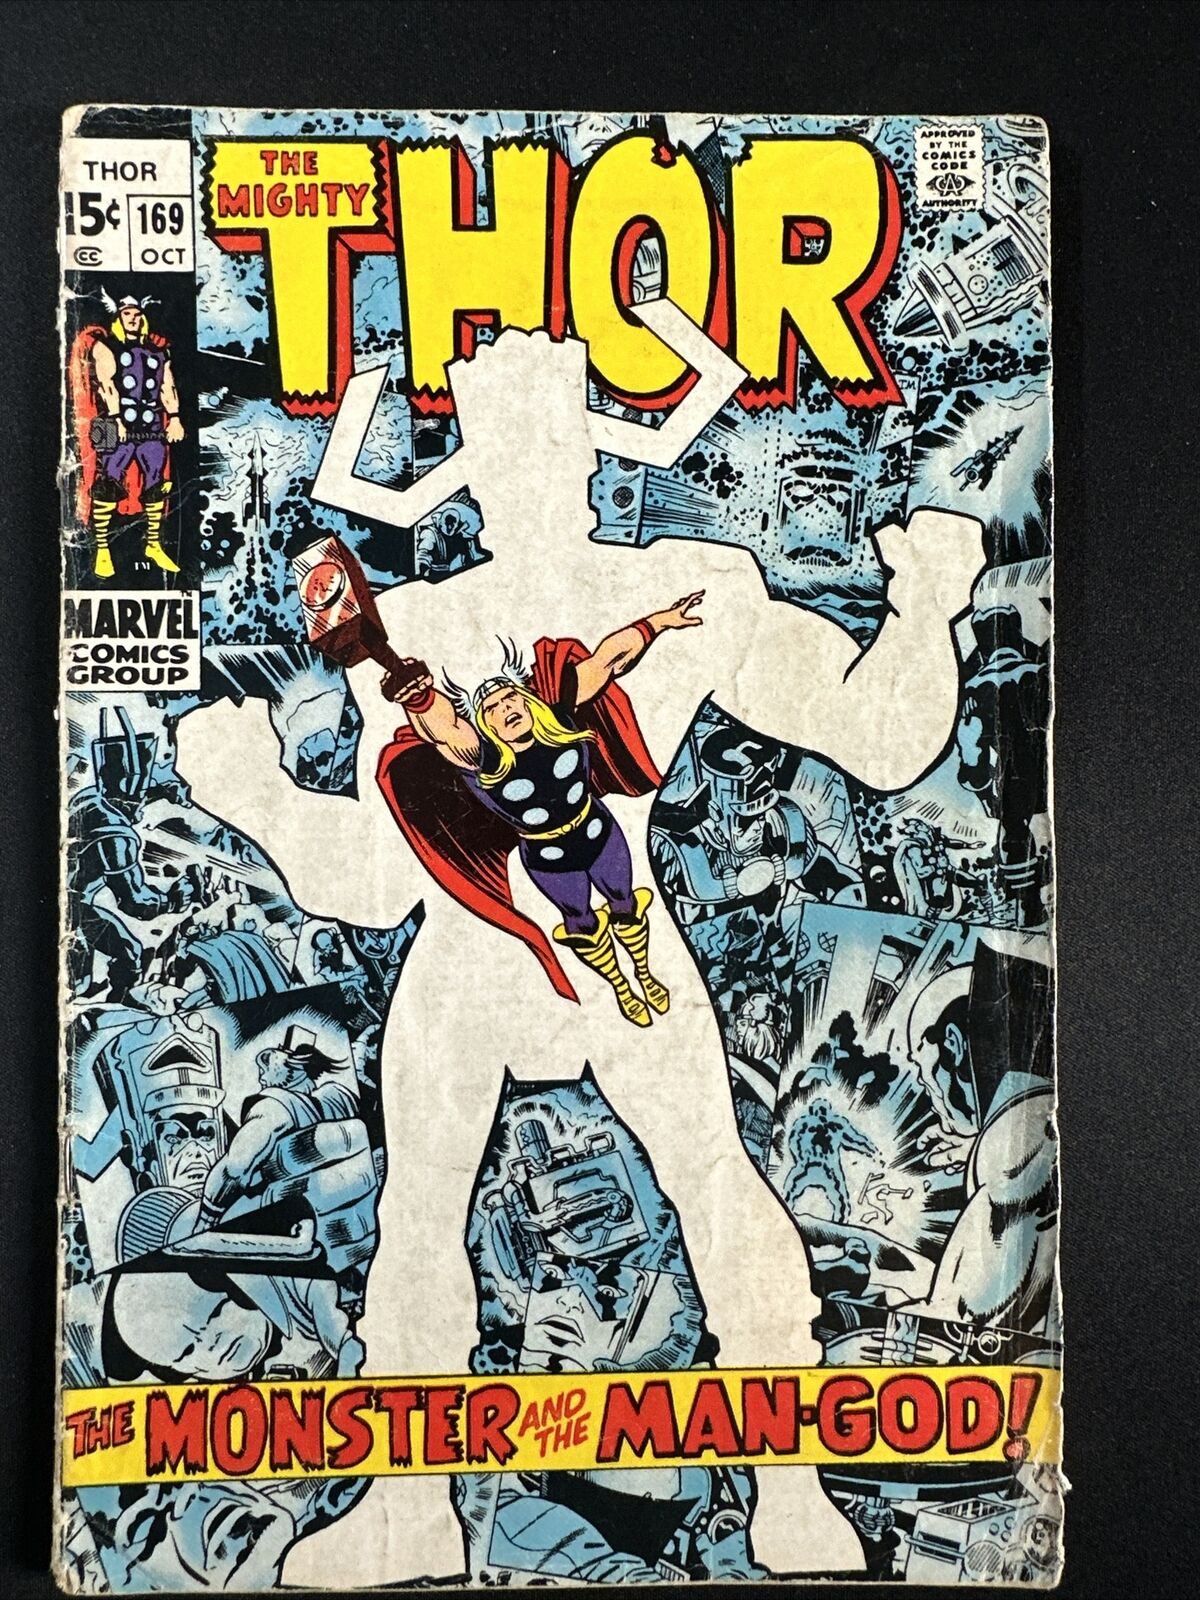 The Mighty Thor #169 Vintage Marvel Comics Silver Age 1st Print 1969 Good *A2